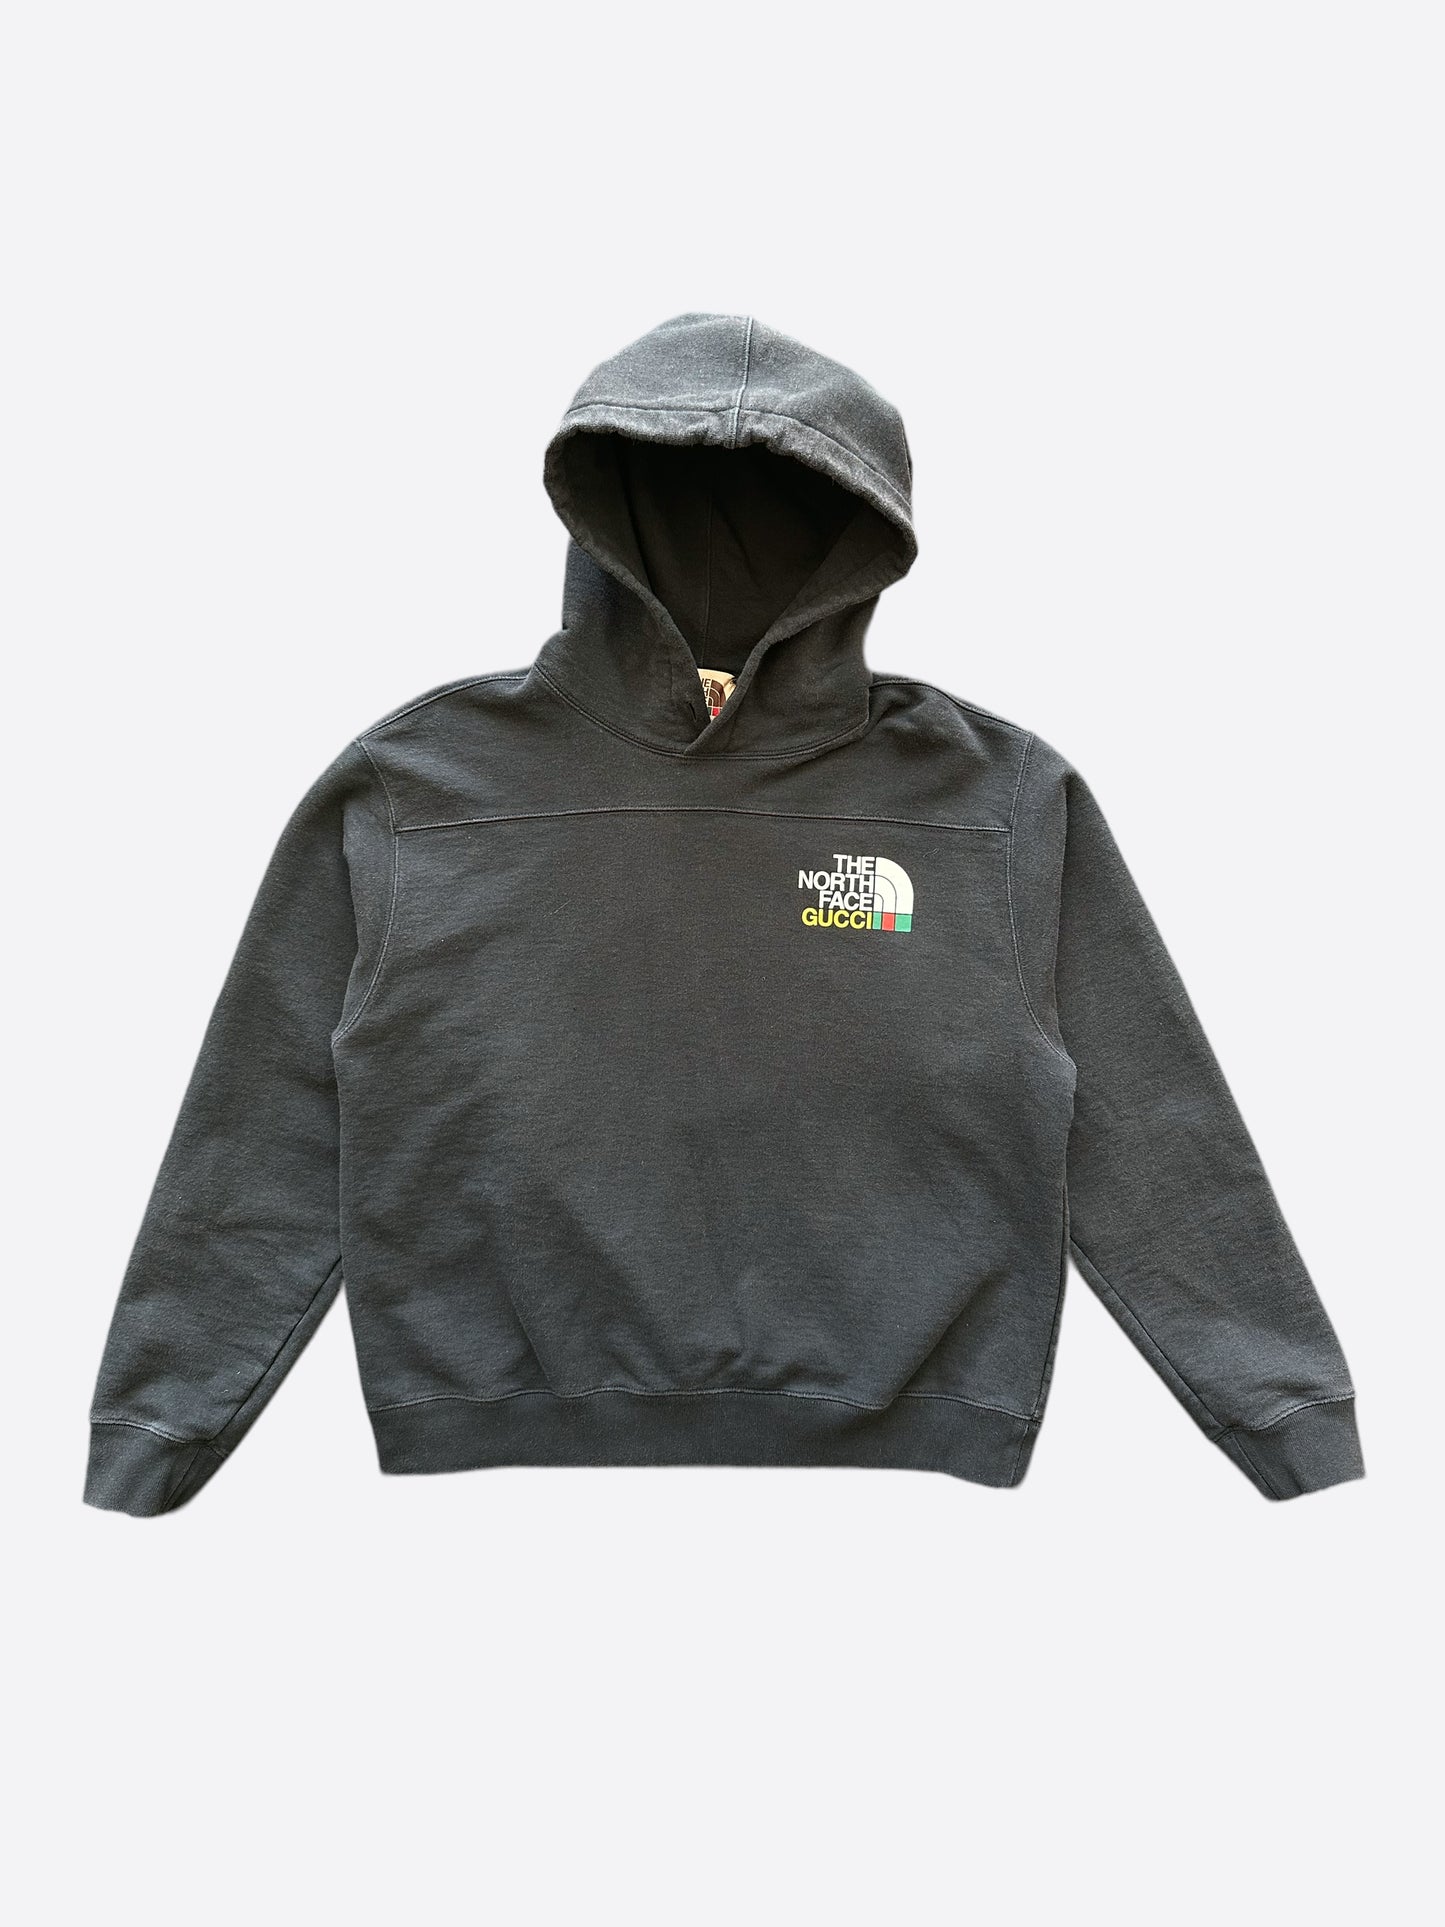 Gucci Black The North Face Edition Pullover Hoodie Gucci